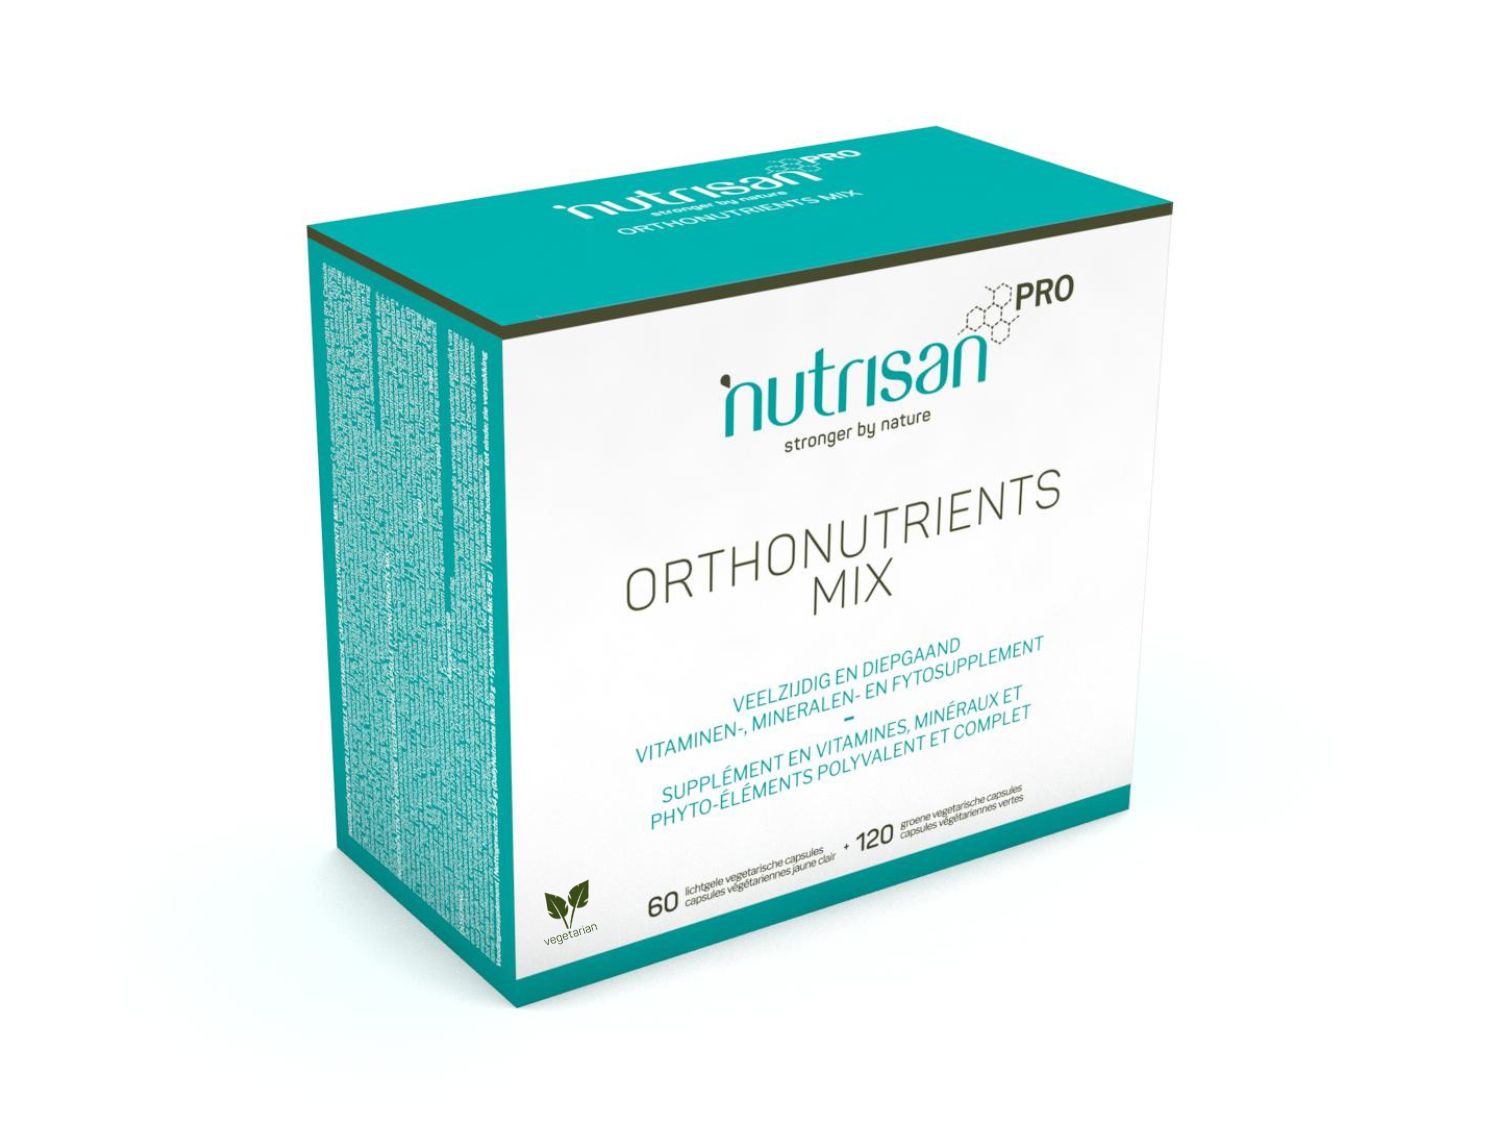 OrthoNutrients Mix